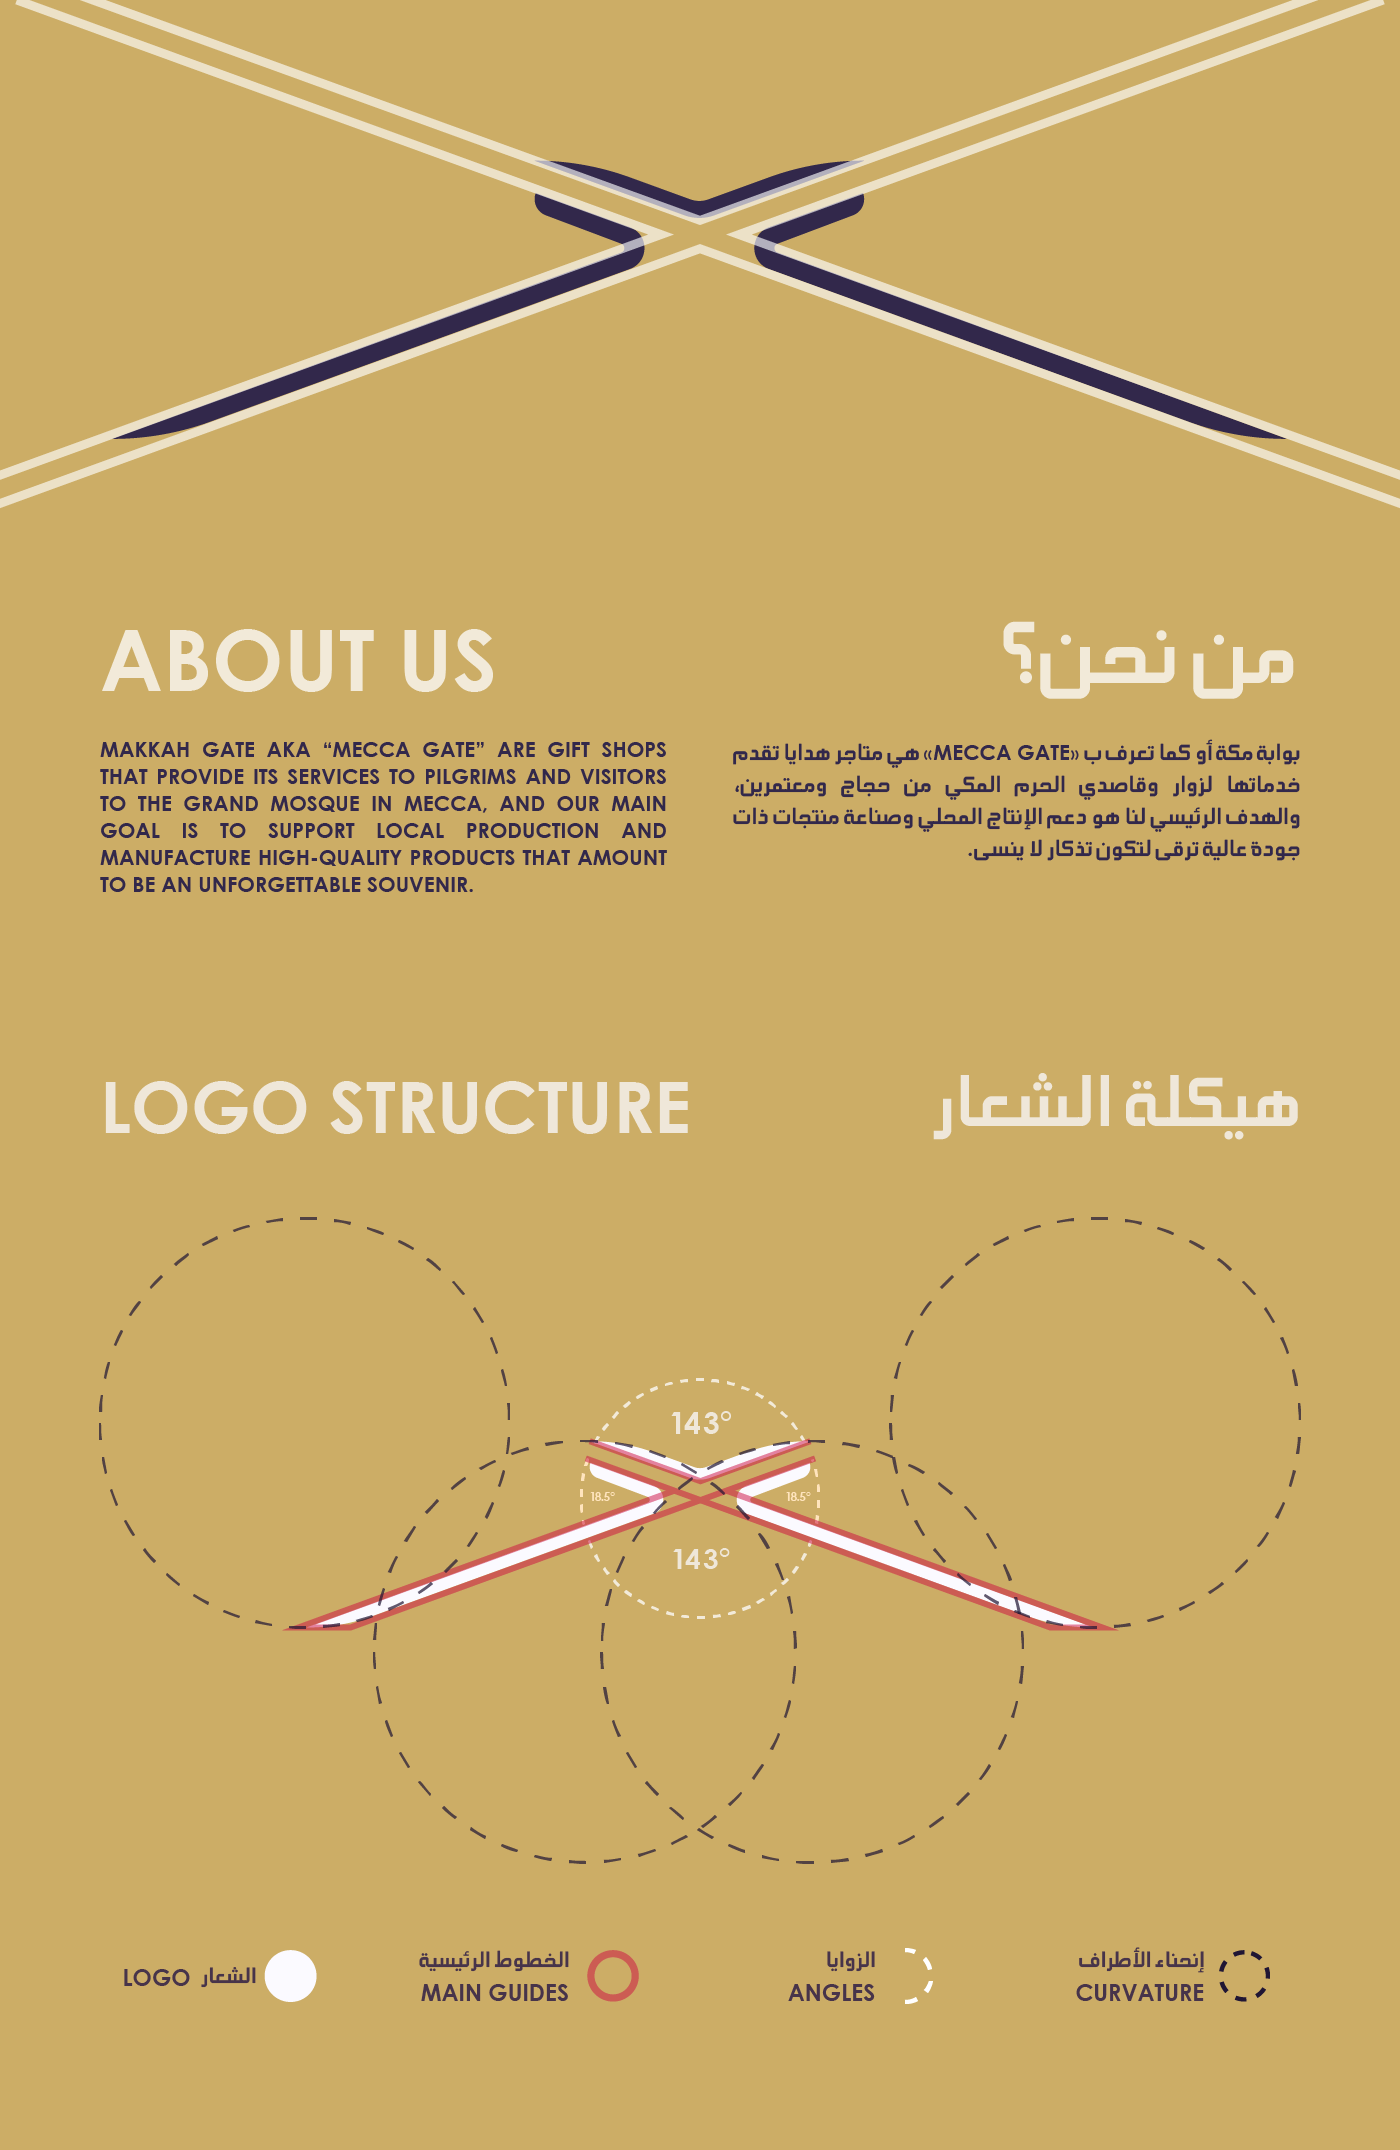 About us & Logo Structure